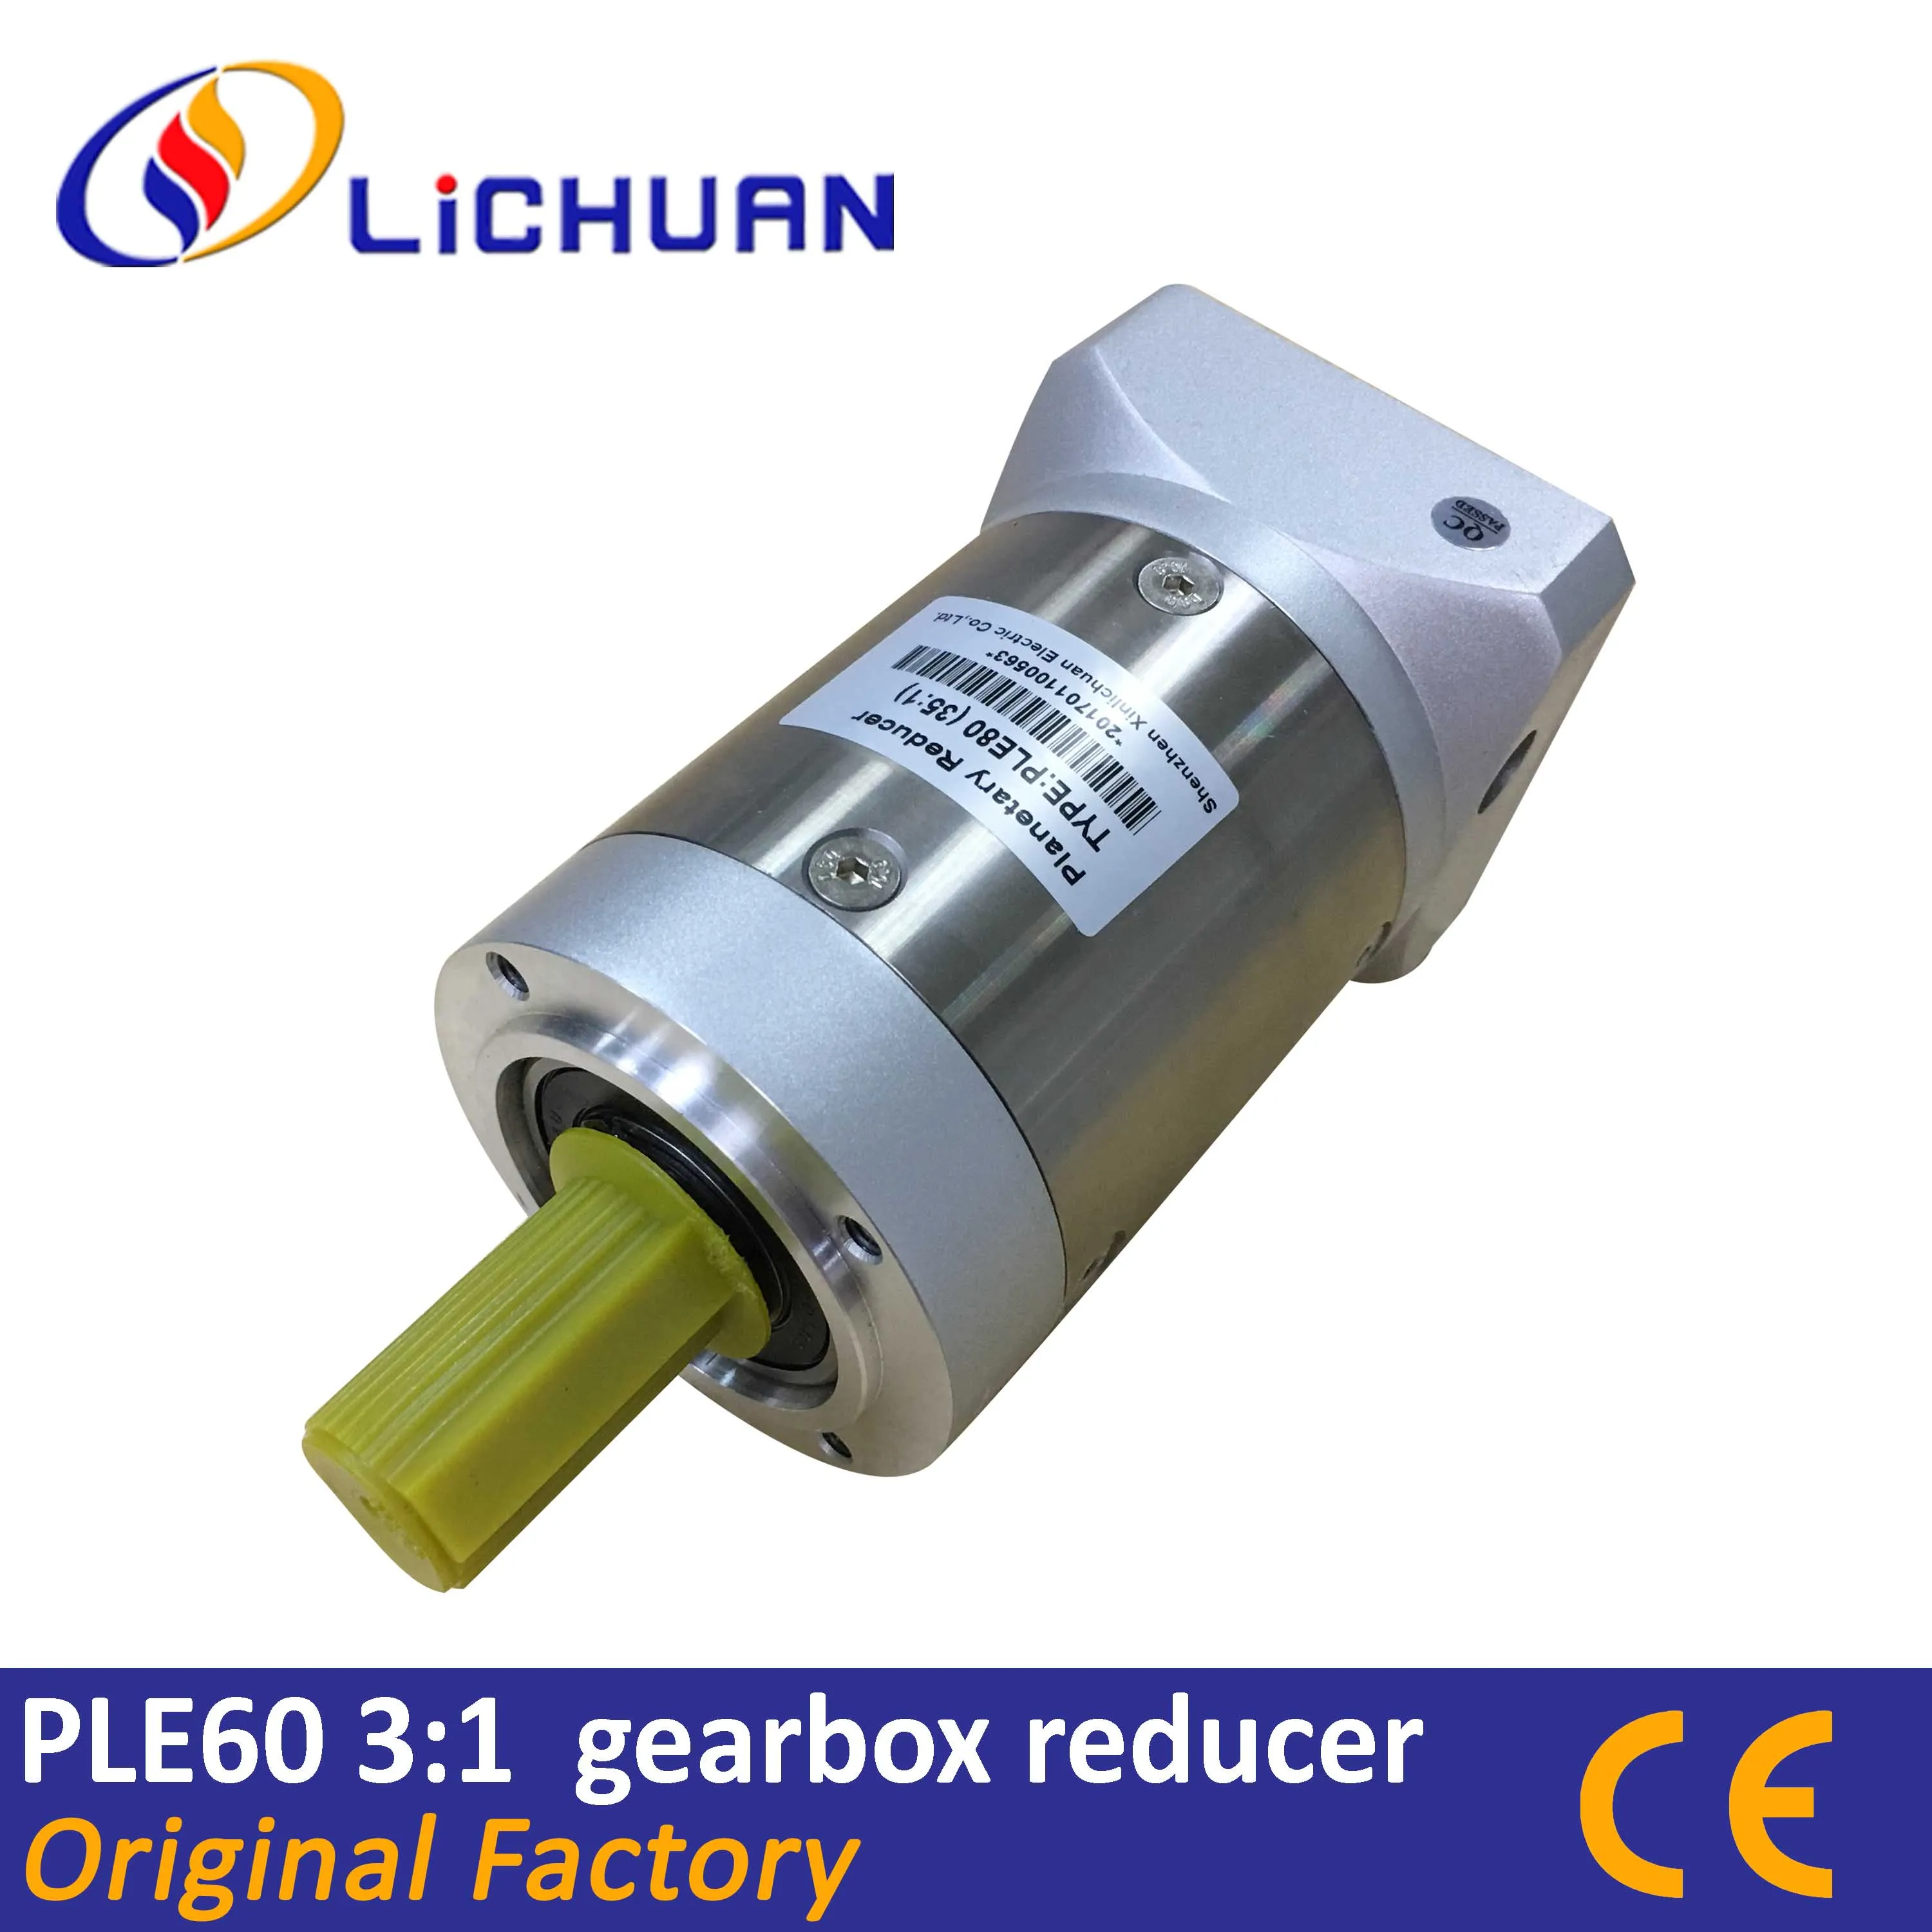 

PLE60 planetary reducer gearbox 3:1 4:1 5:1 7:1 10:1 gear ratio for Lichuan servo motor and closed loop stepper motor